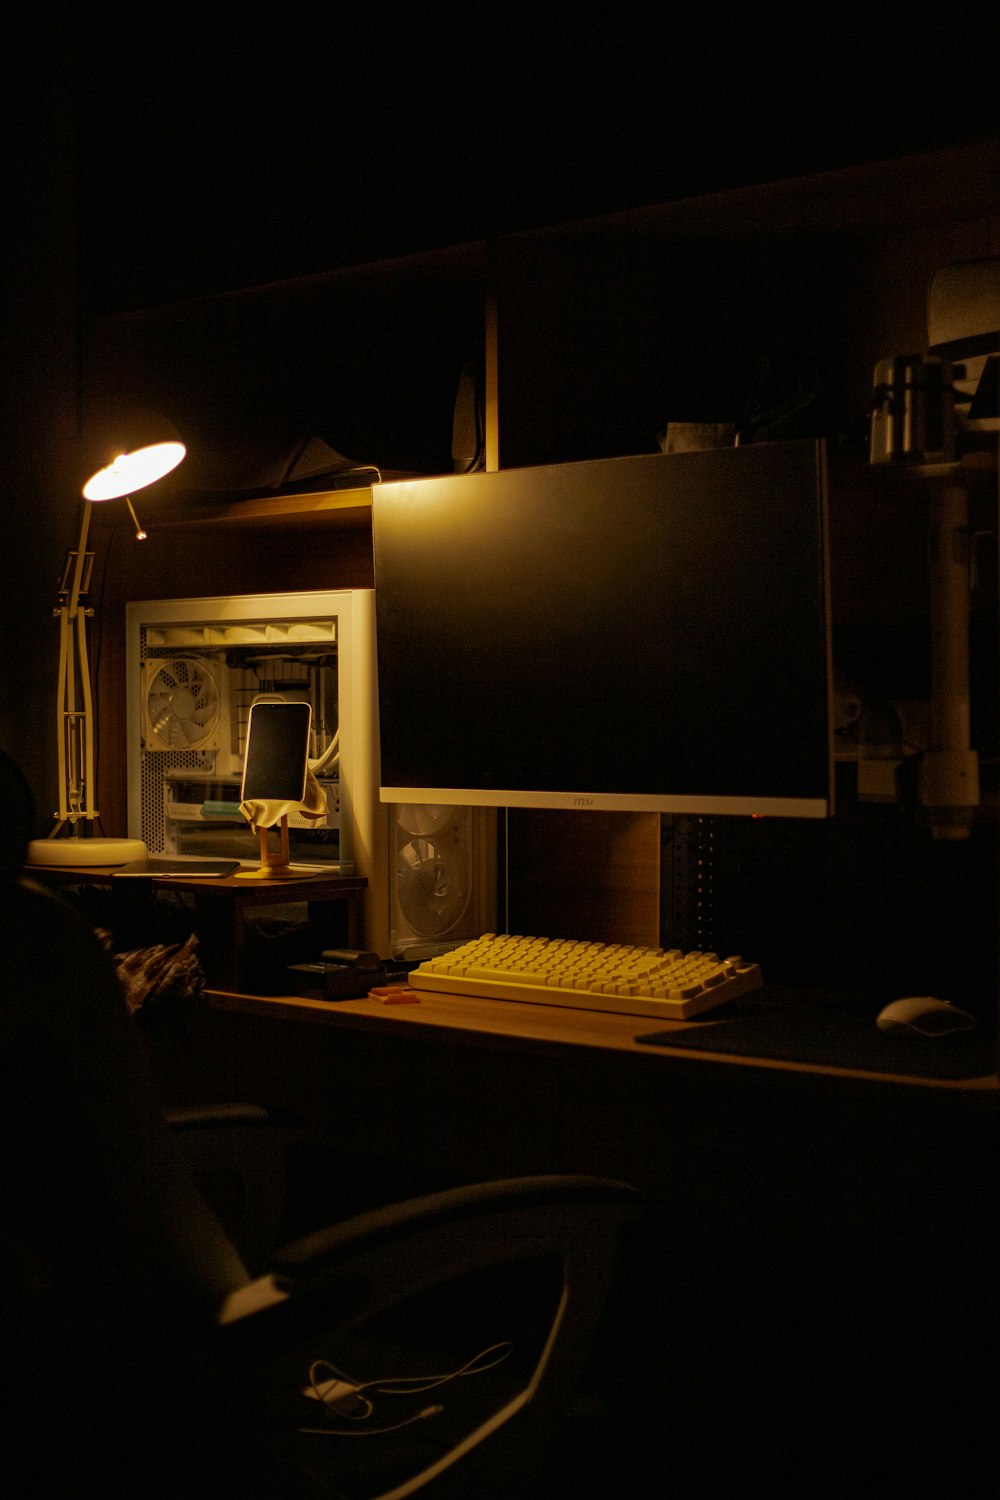 a computer desk with a monitor and keyboard in a dark room